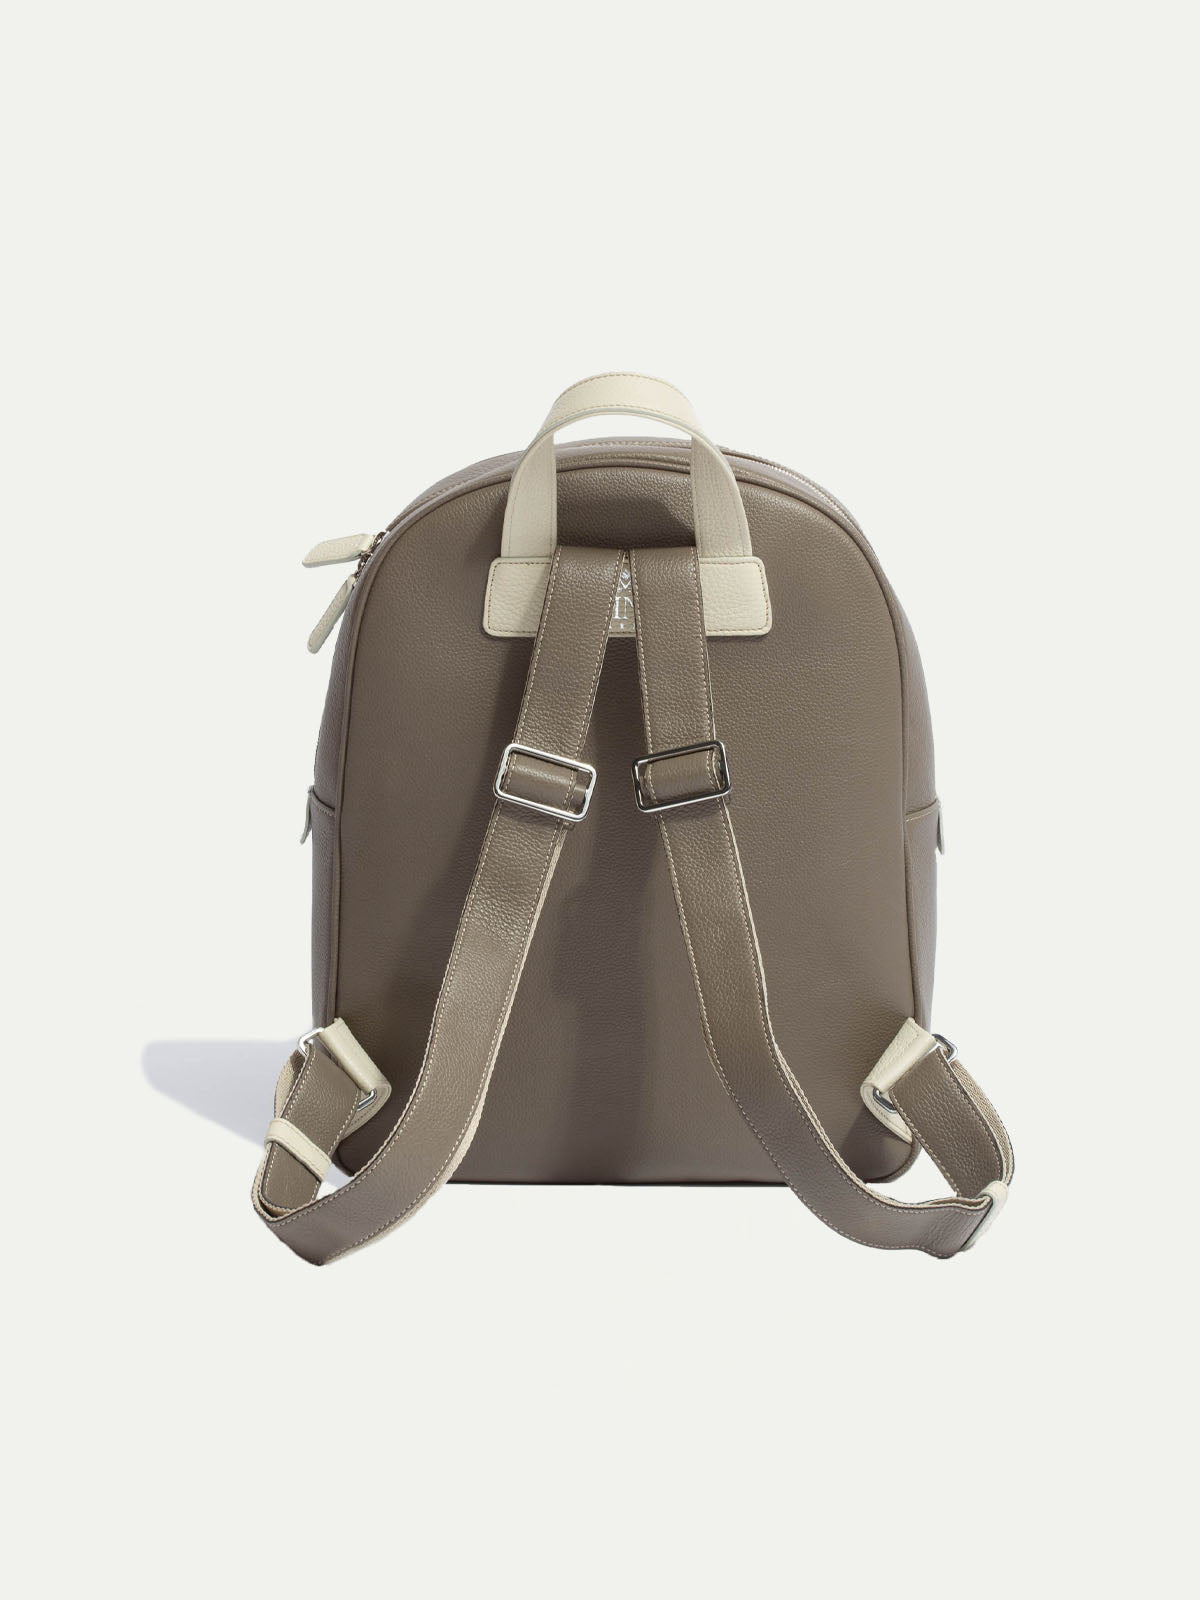 Sac à dos en cuir taupe - Made in Italy